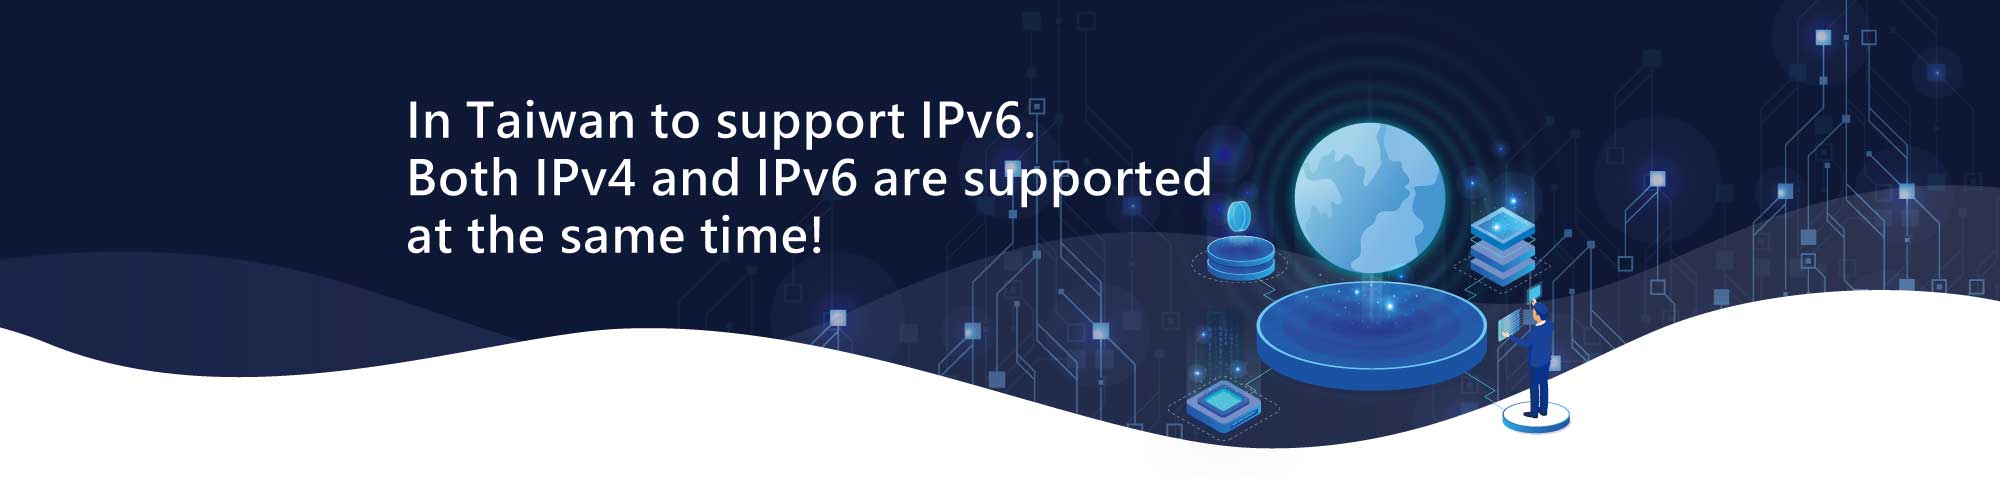 Both IPv4 and IPv6 are supported at the same time